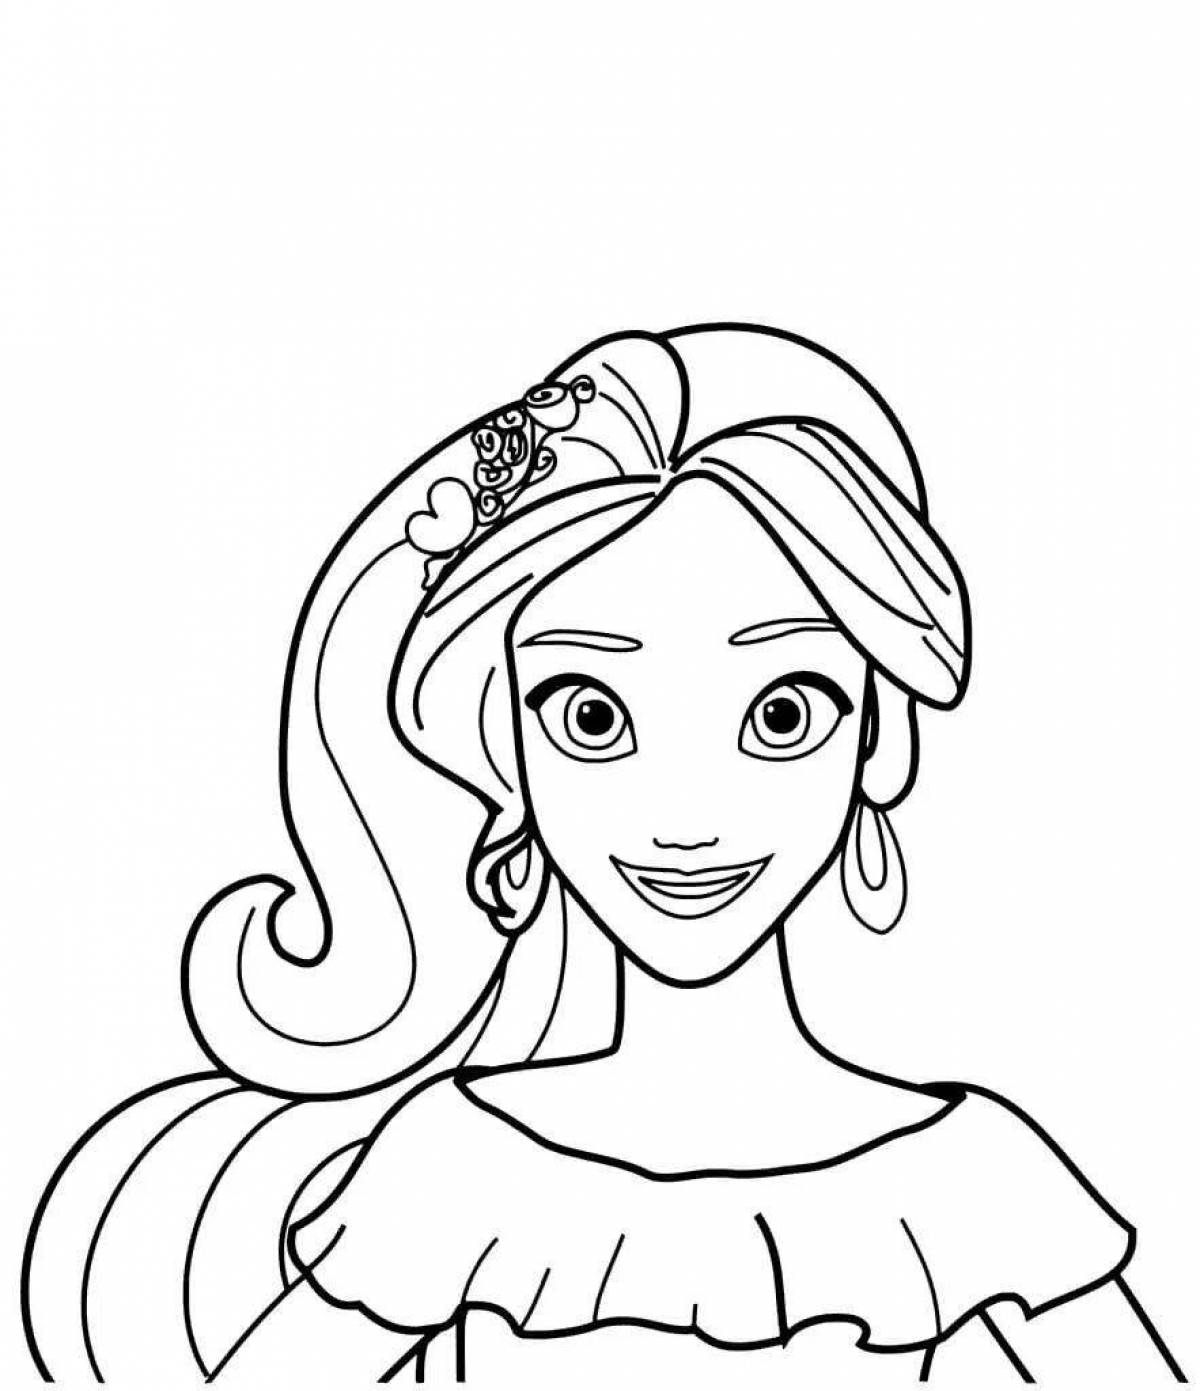 Majestic elena lovely coloring book